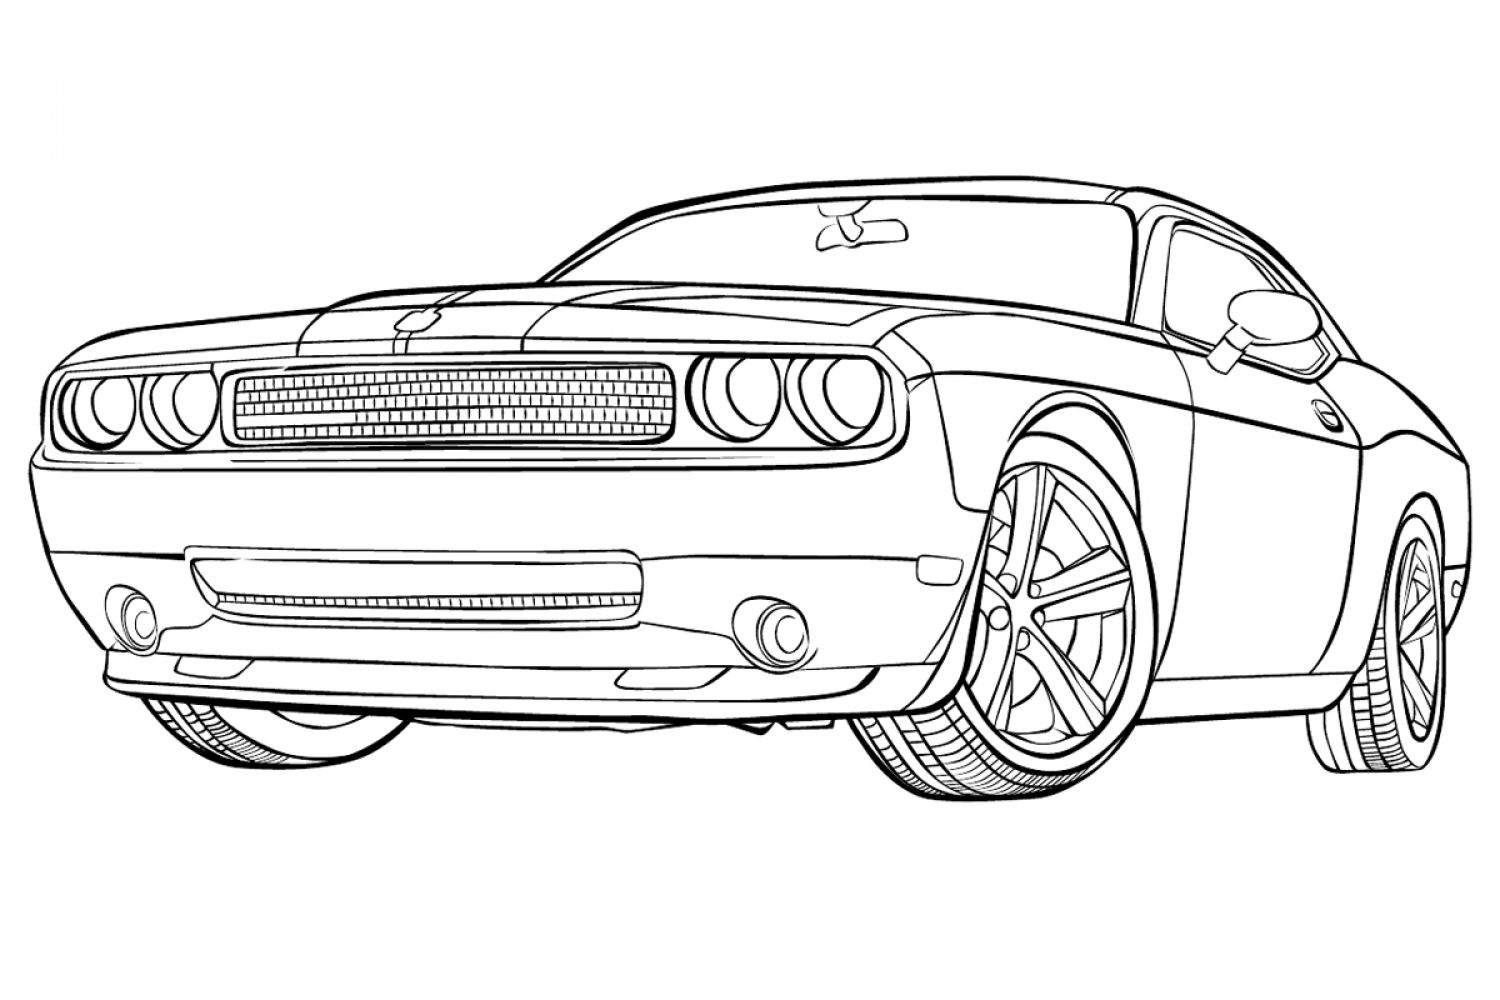 449 Simple Muscle Car Coloring Pages To Print for Kindergarten